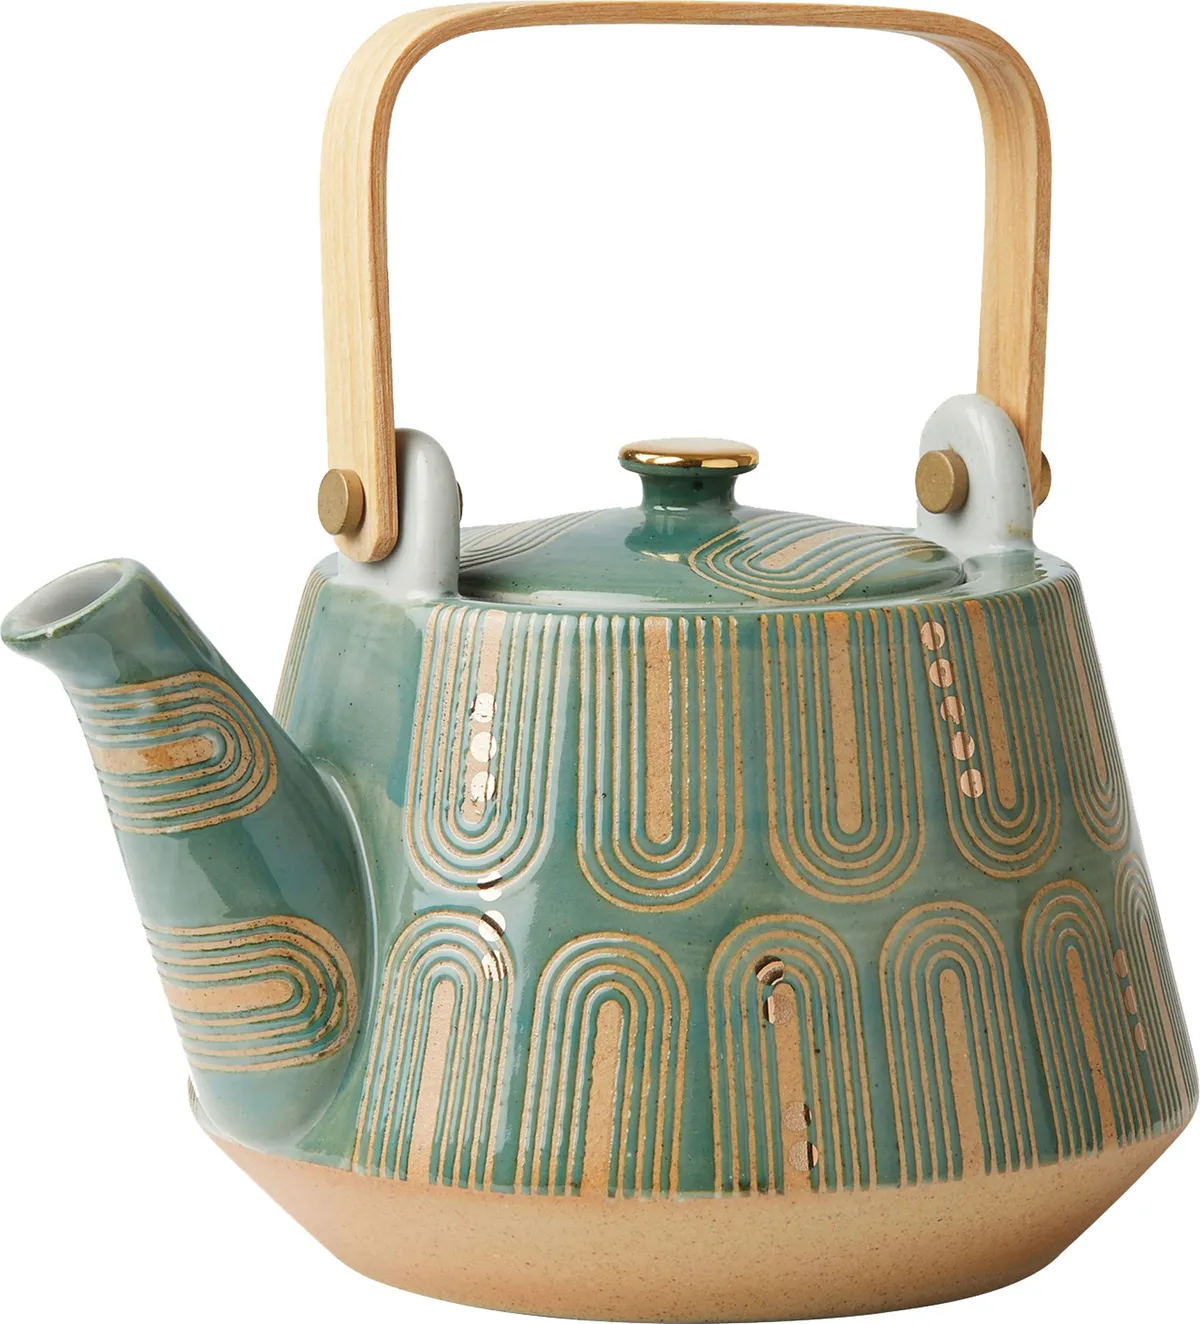 Try a mix of textures with this metallic detail teapot with a square wooden handle. £34 from Oliver Bonas